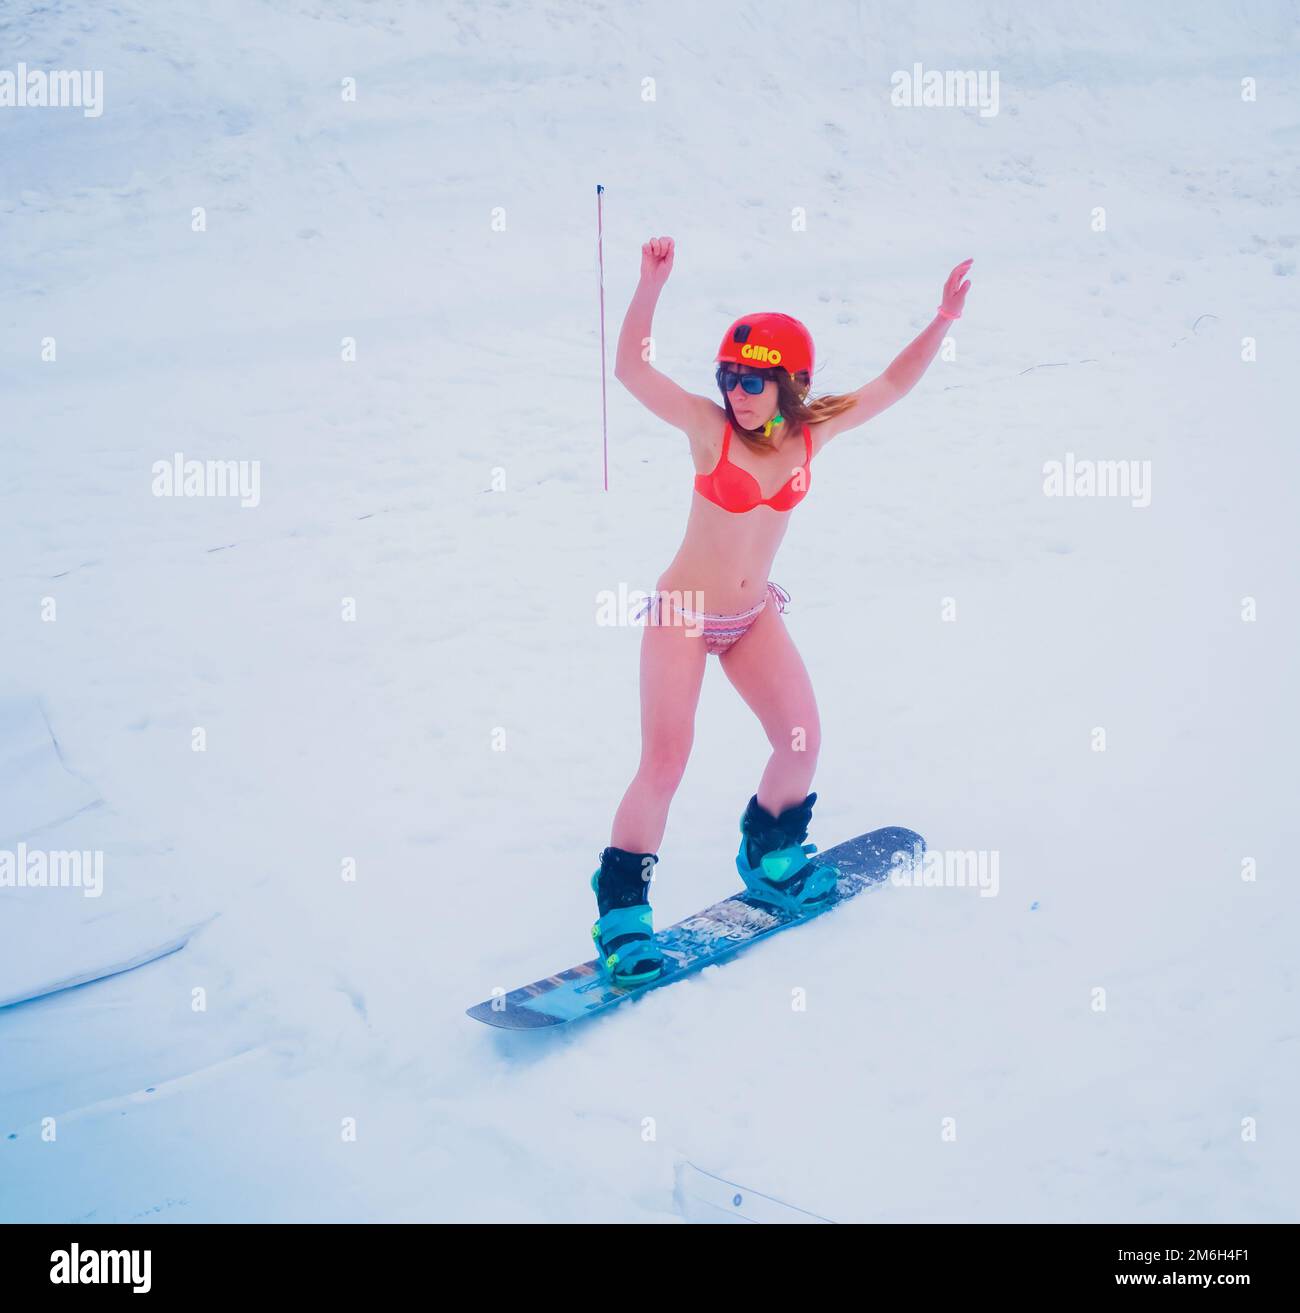 Russia, Sochi 11.05.2019. A beautiful girl in an orange swimsuit and helmet rides a snowboard down the slope with her hands up. Stock Photo